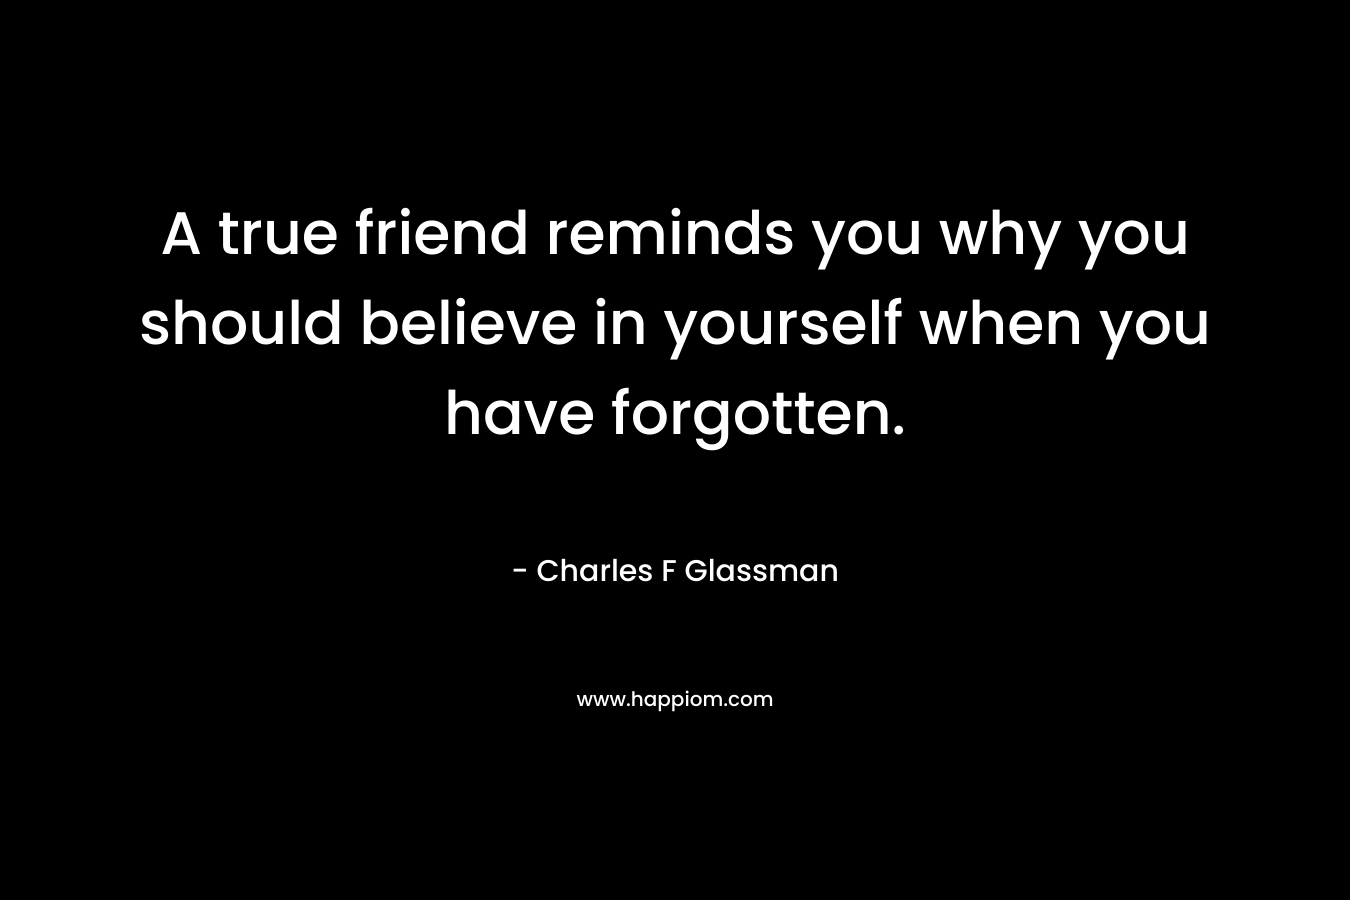 A true friend reminds you why you should believe in yourself when you have forgotten.